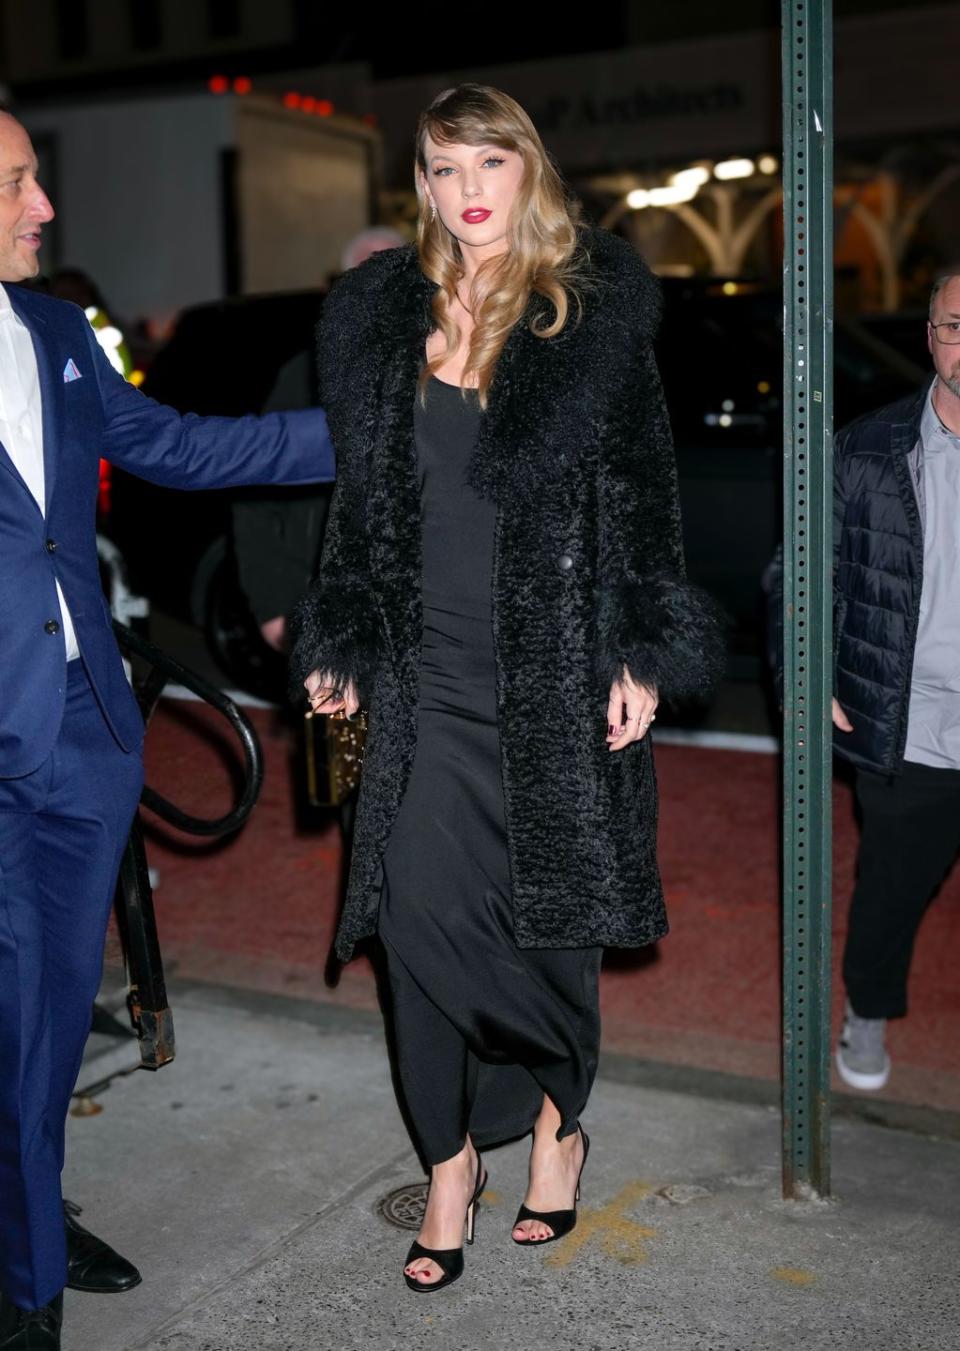 taylor swift arriving at emma stone's screening on december 6, 2023